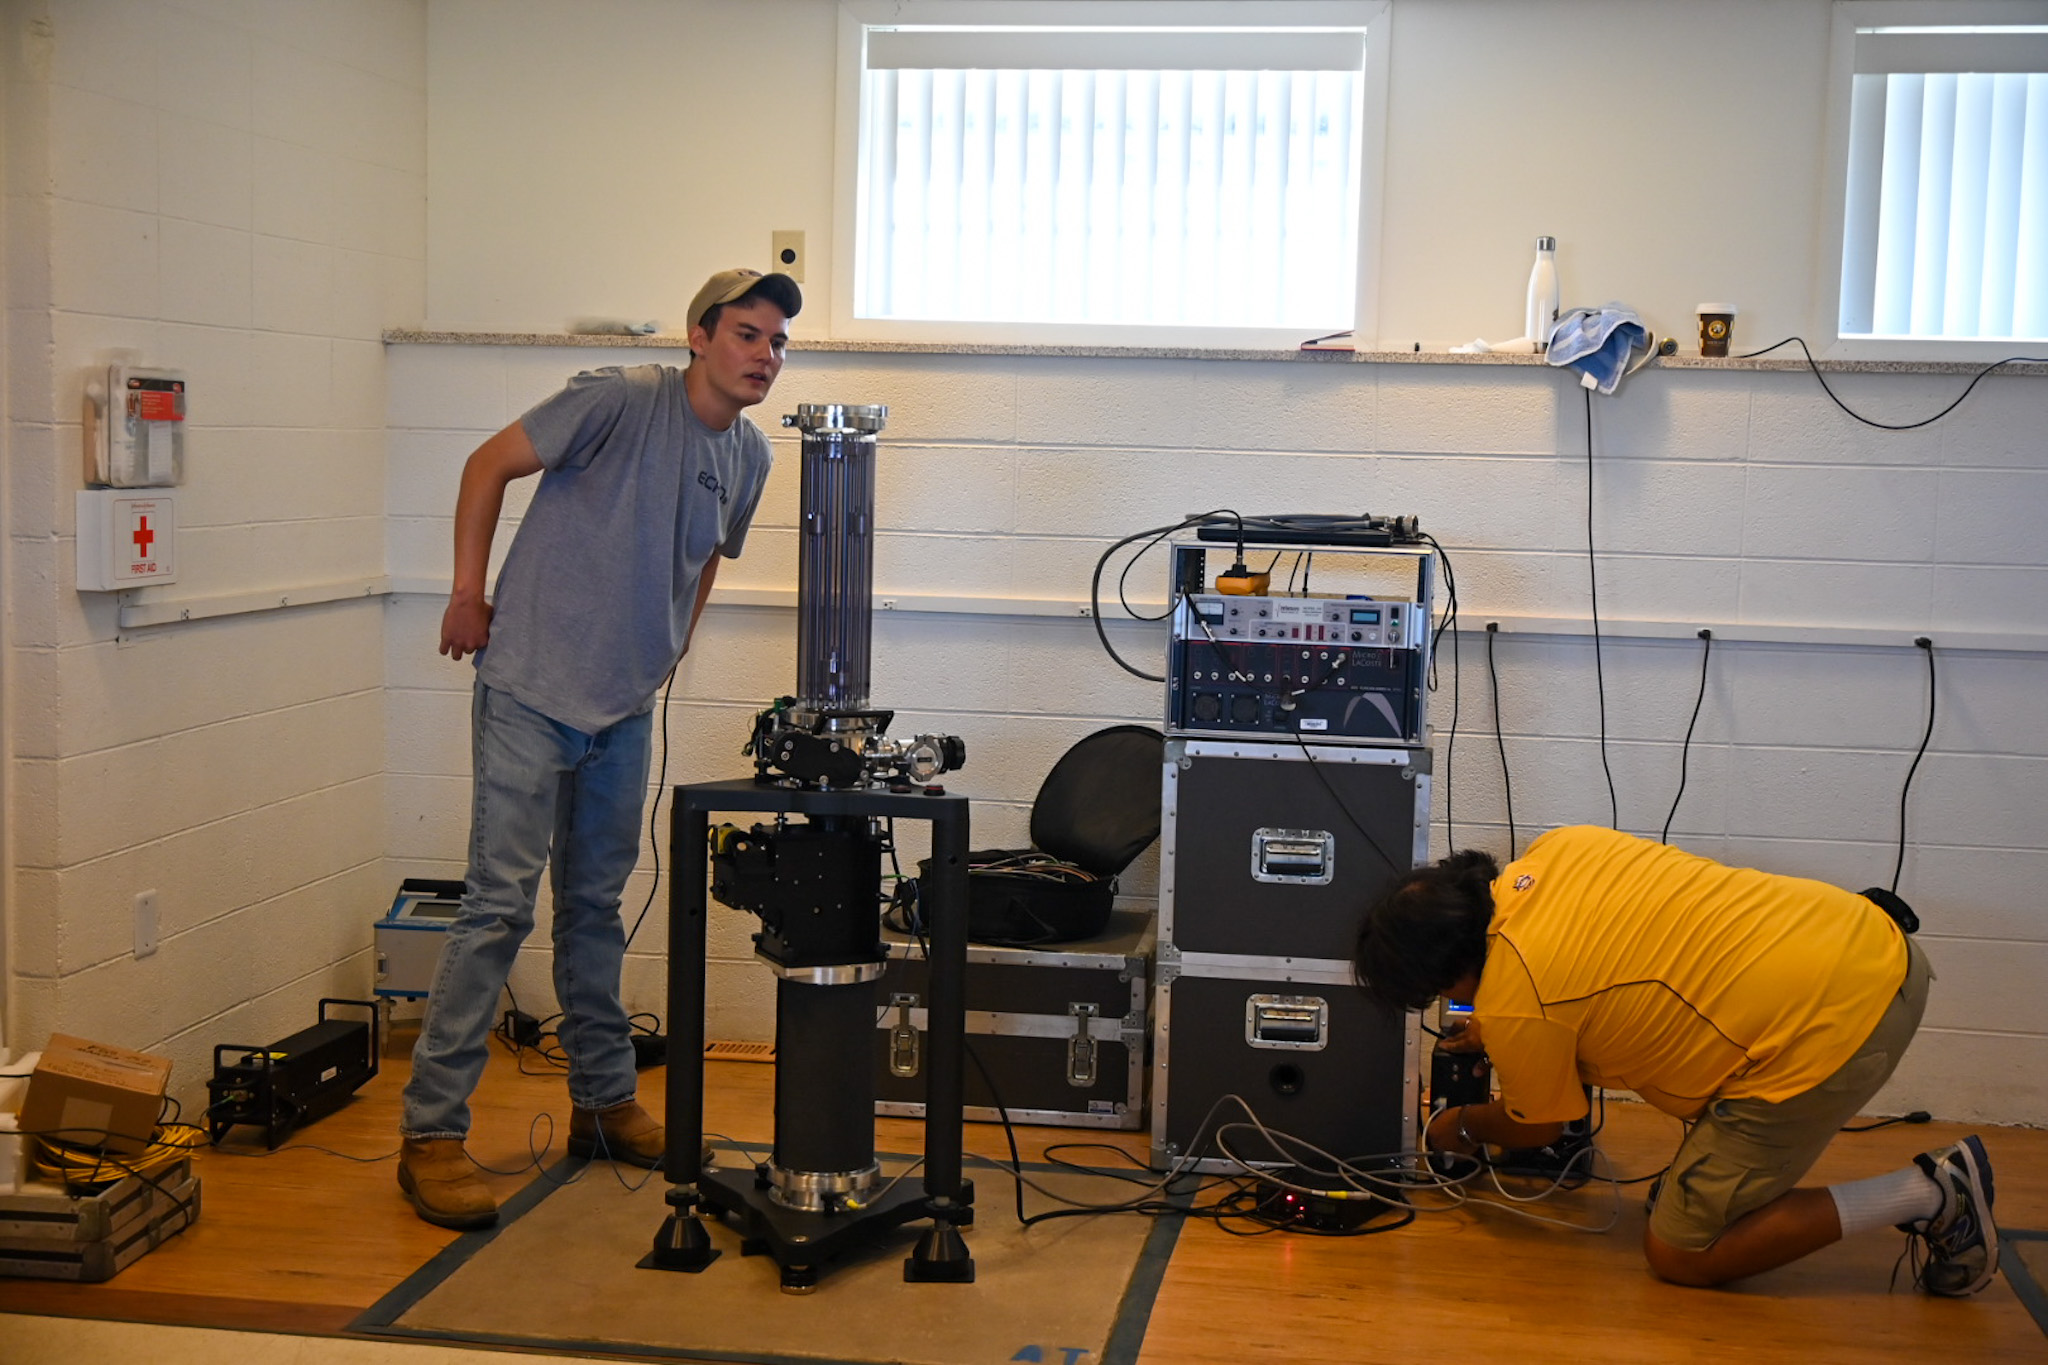 One man looks at the top of the gravity meter, inspecting a level, while another kneels beside it plugging in various cords.